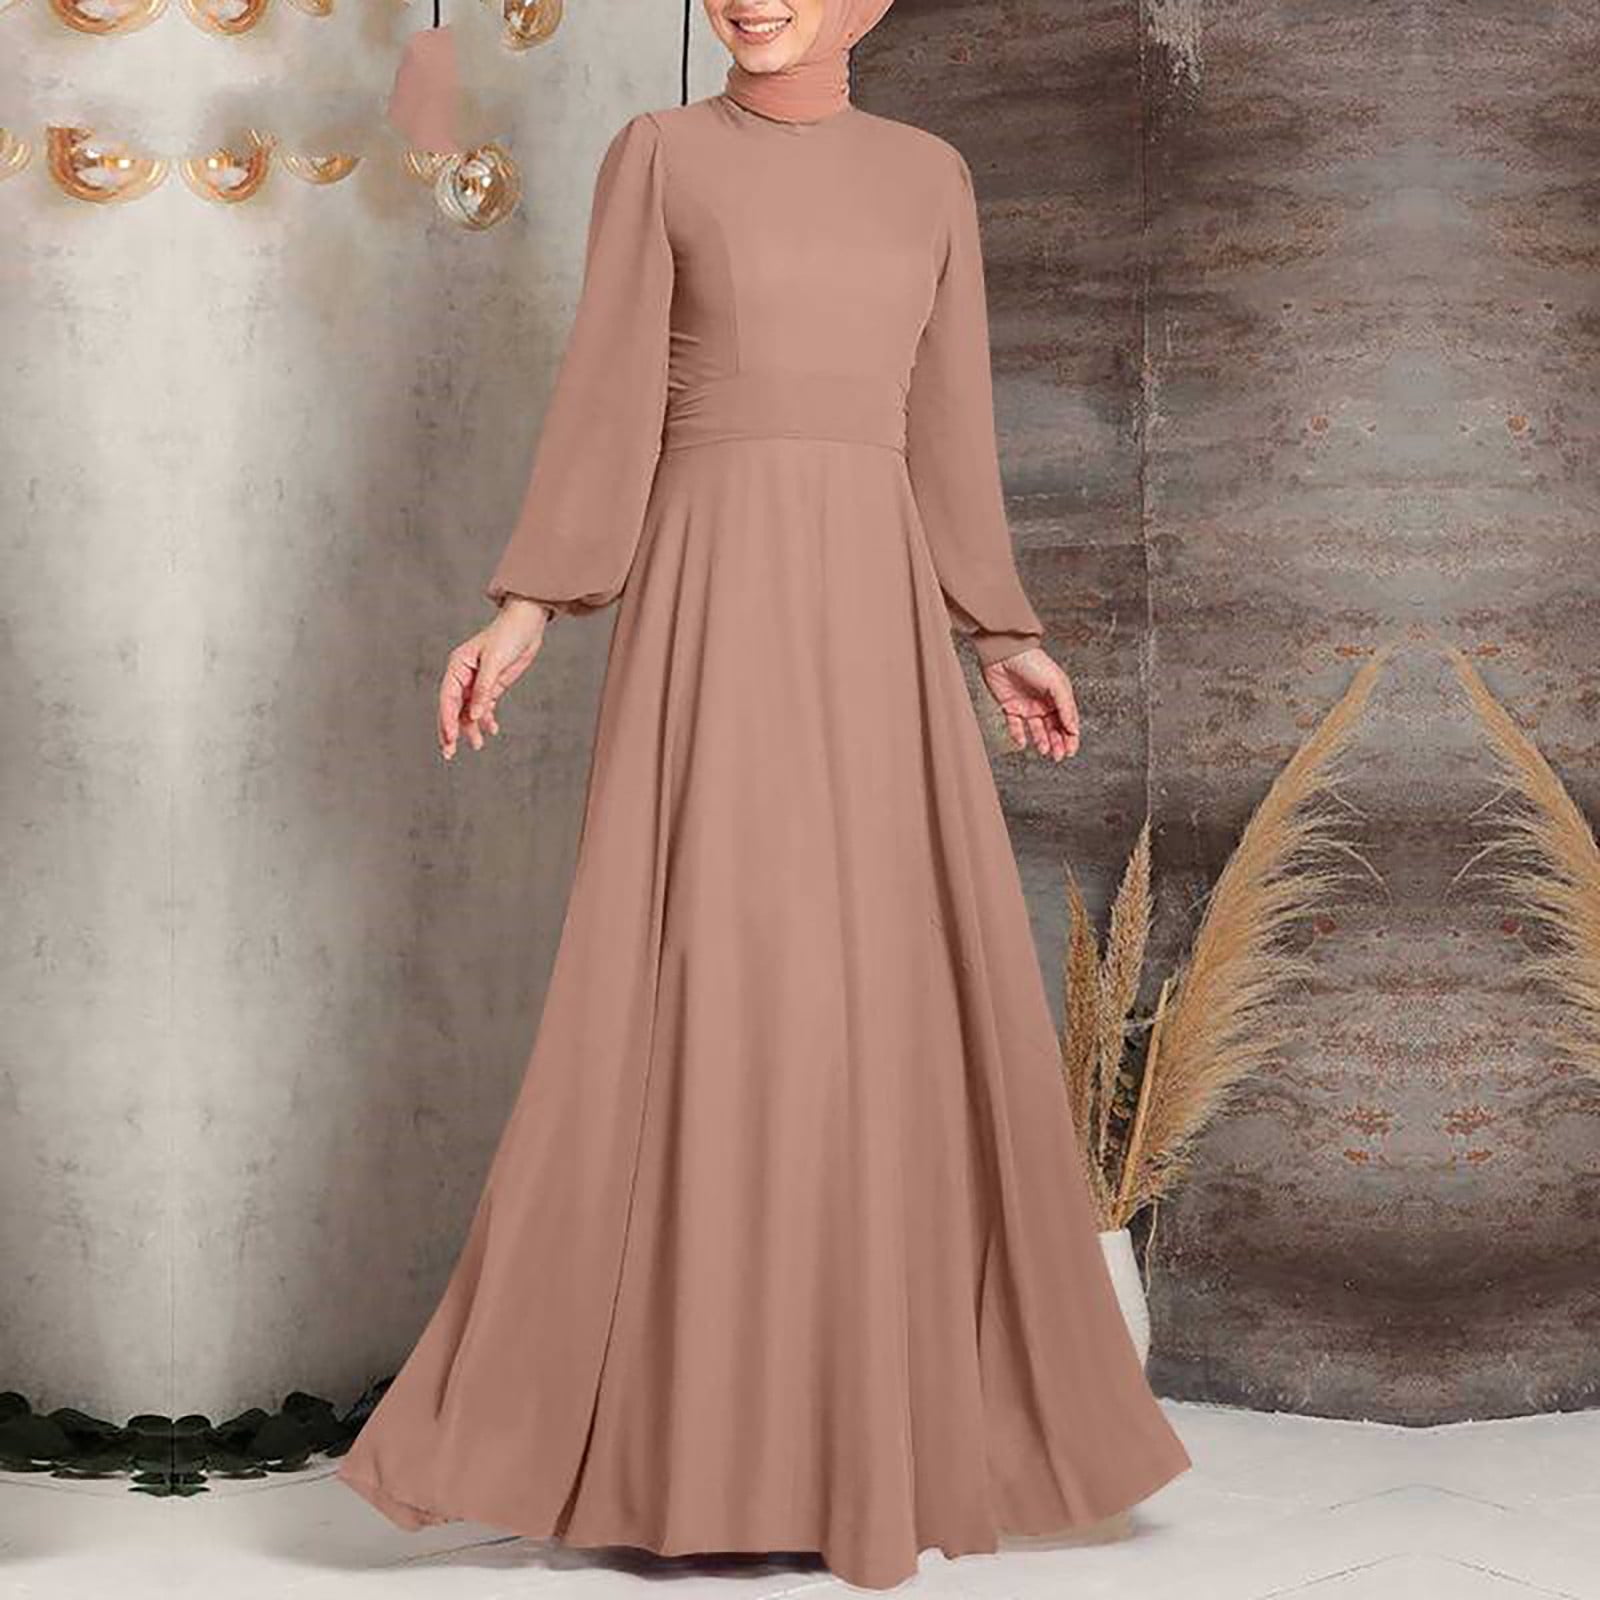 Long Sleeves Party Dresses With Hijab | Soiree dress, Tea length bridesmaid  dresses, Prom dresses with sleeves